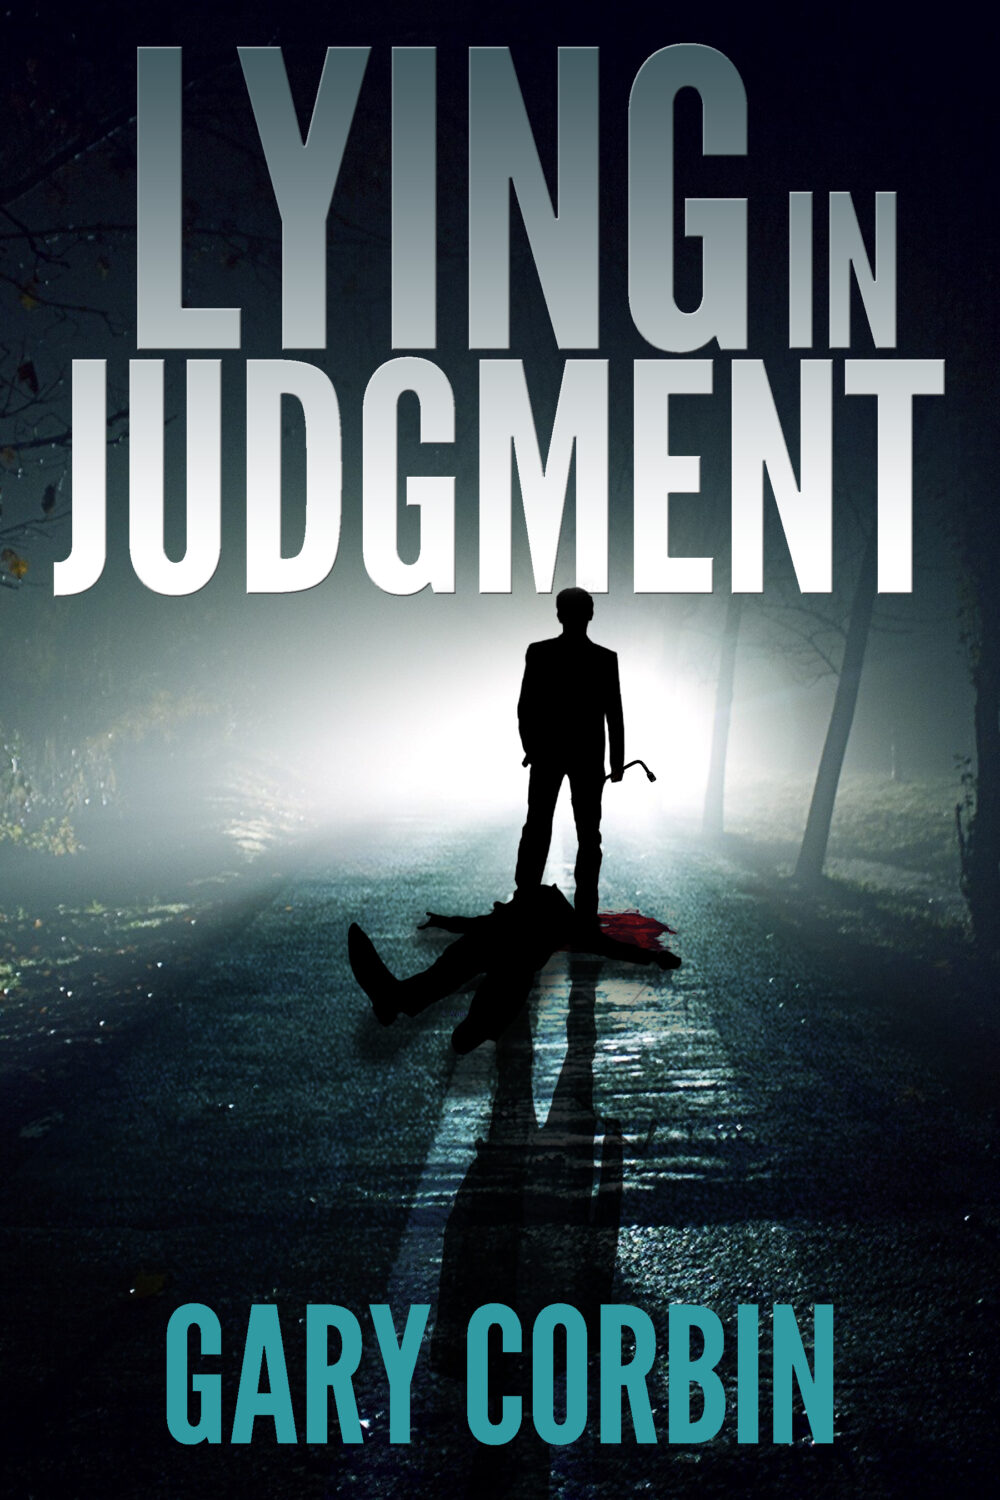 Lying in Judgment